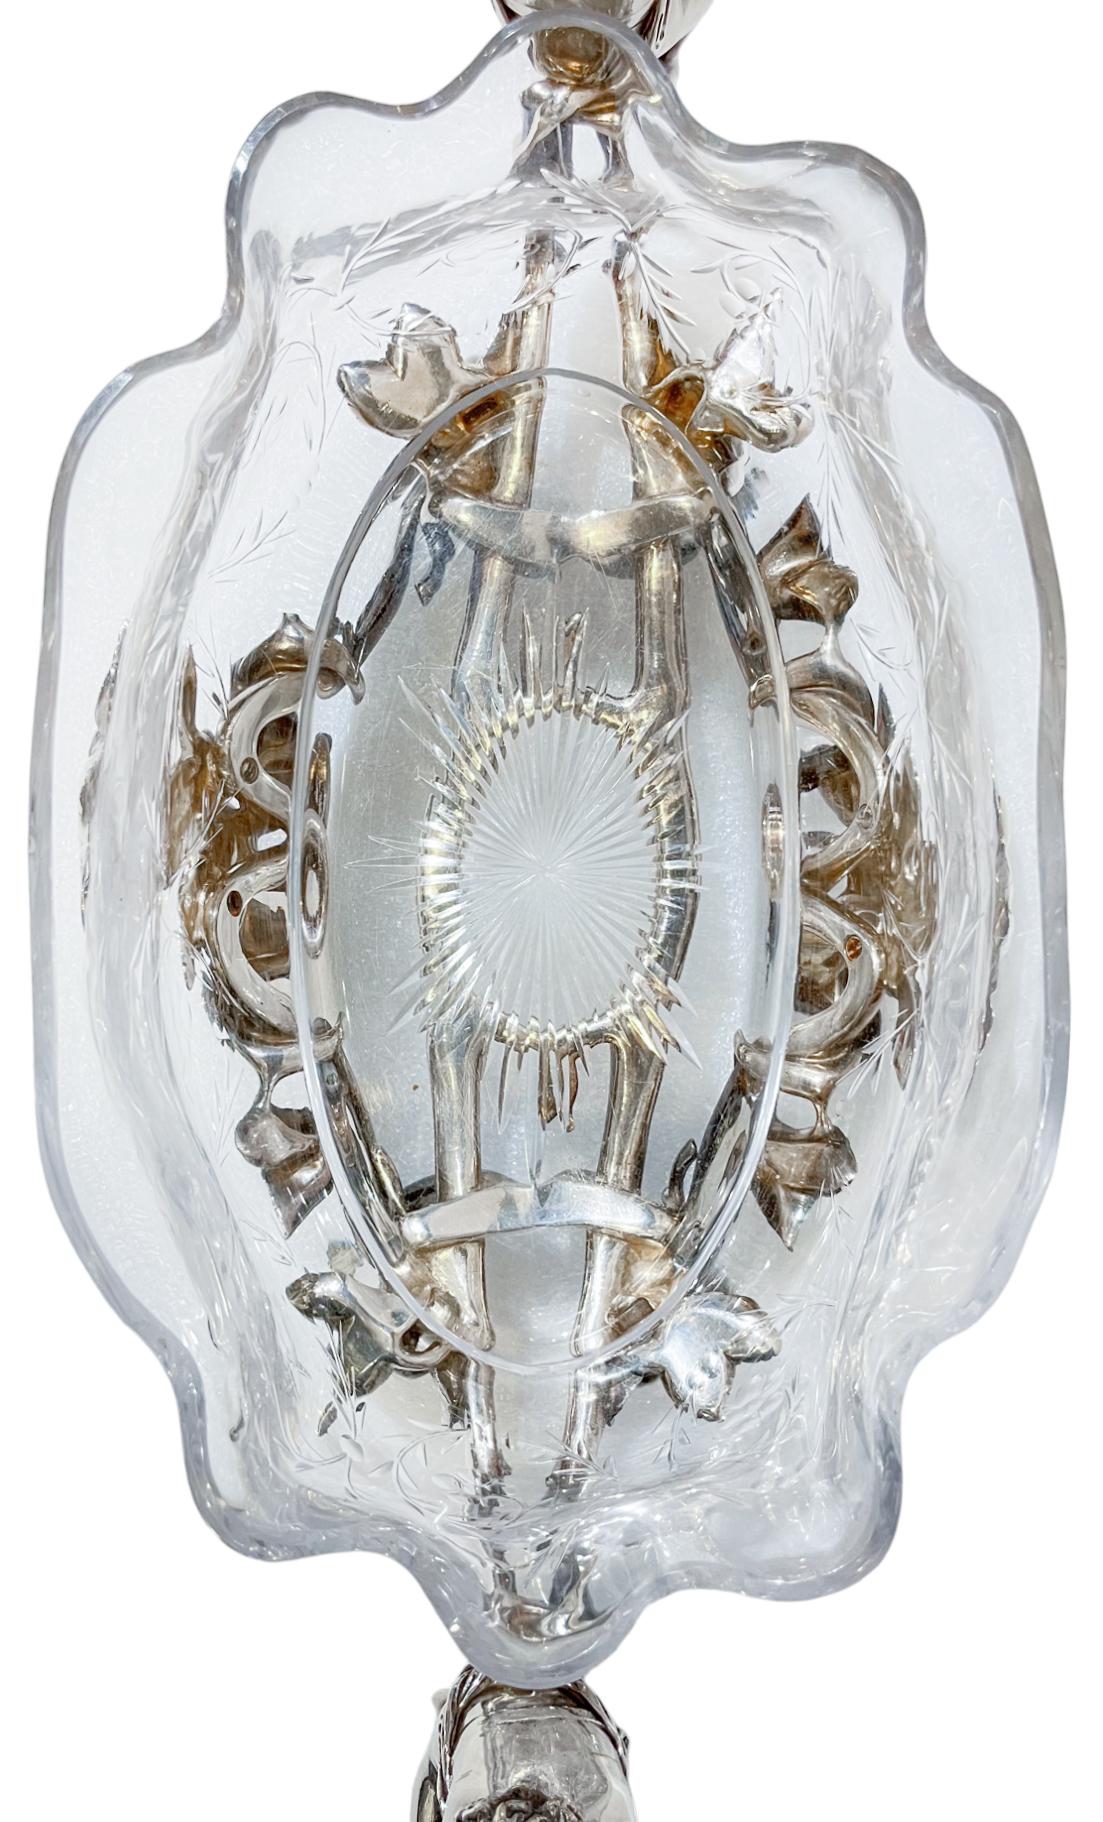 Celestial Christofle Crystal Centerpiece Bowl On Fitted Silver Stand In Good Condition For Sale In New York, NY